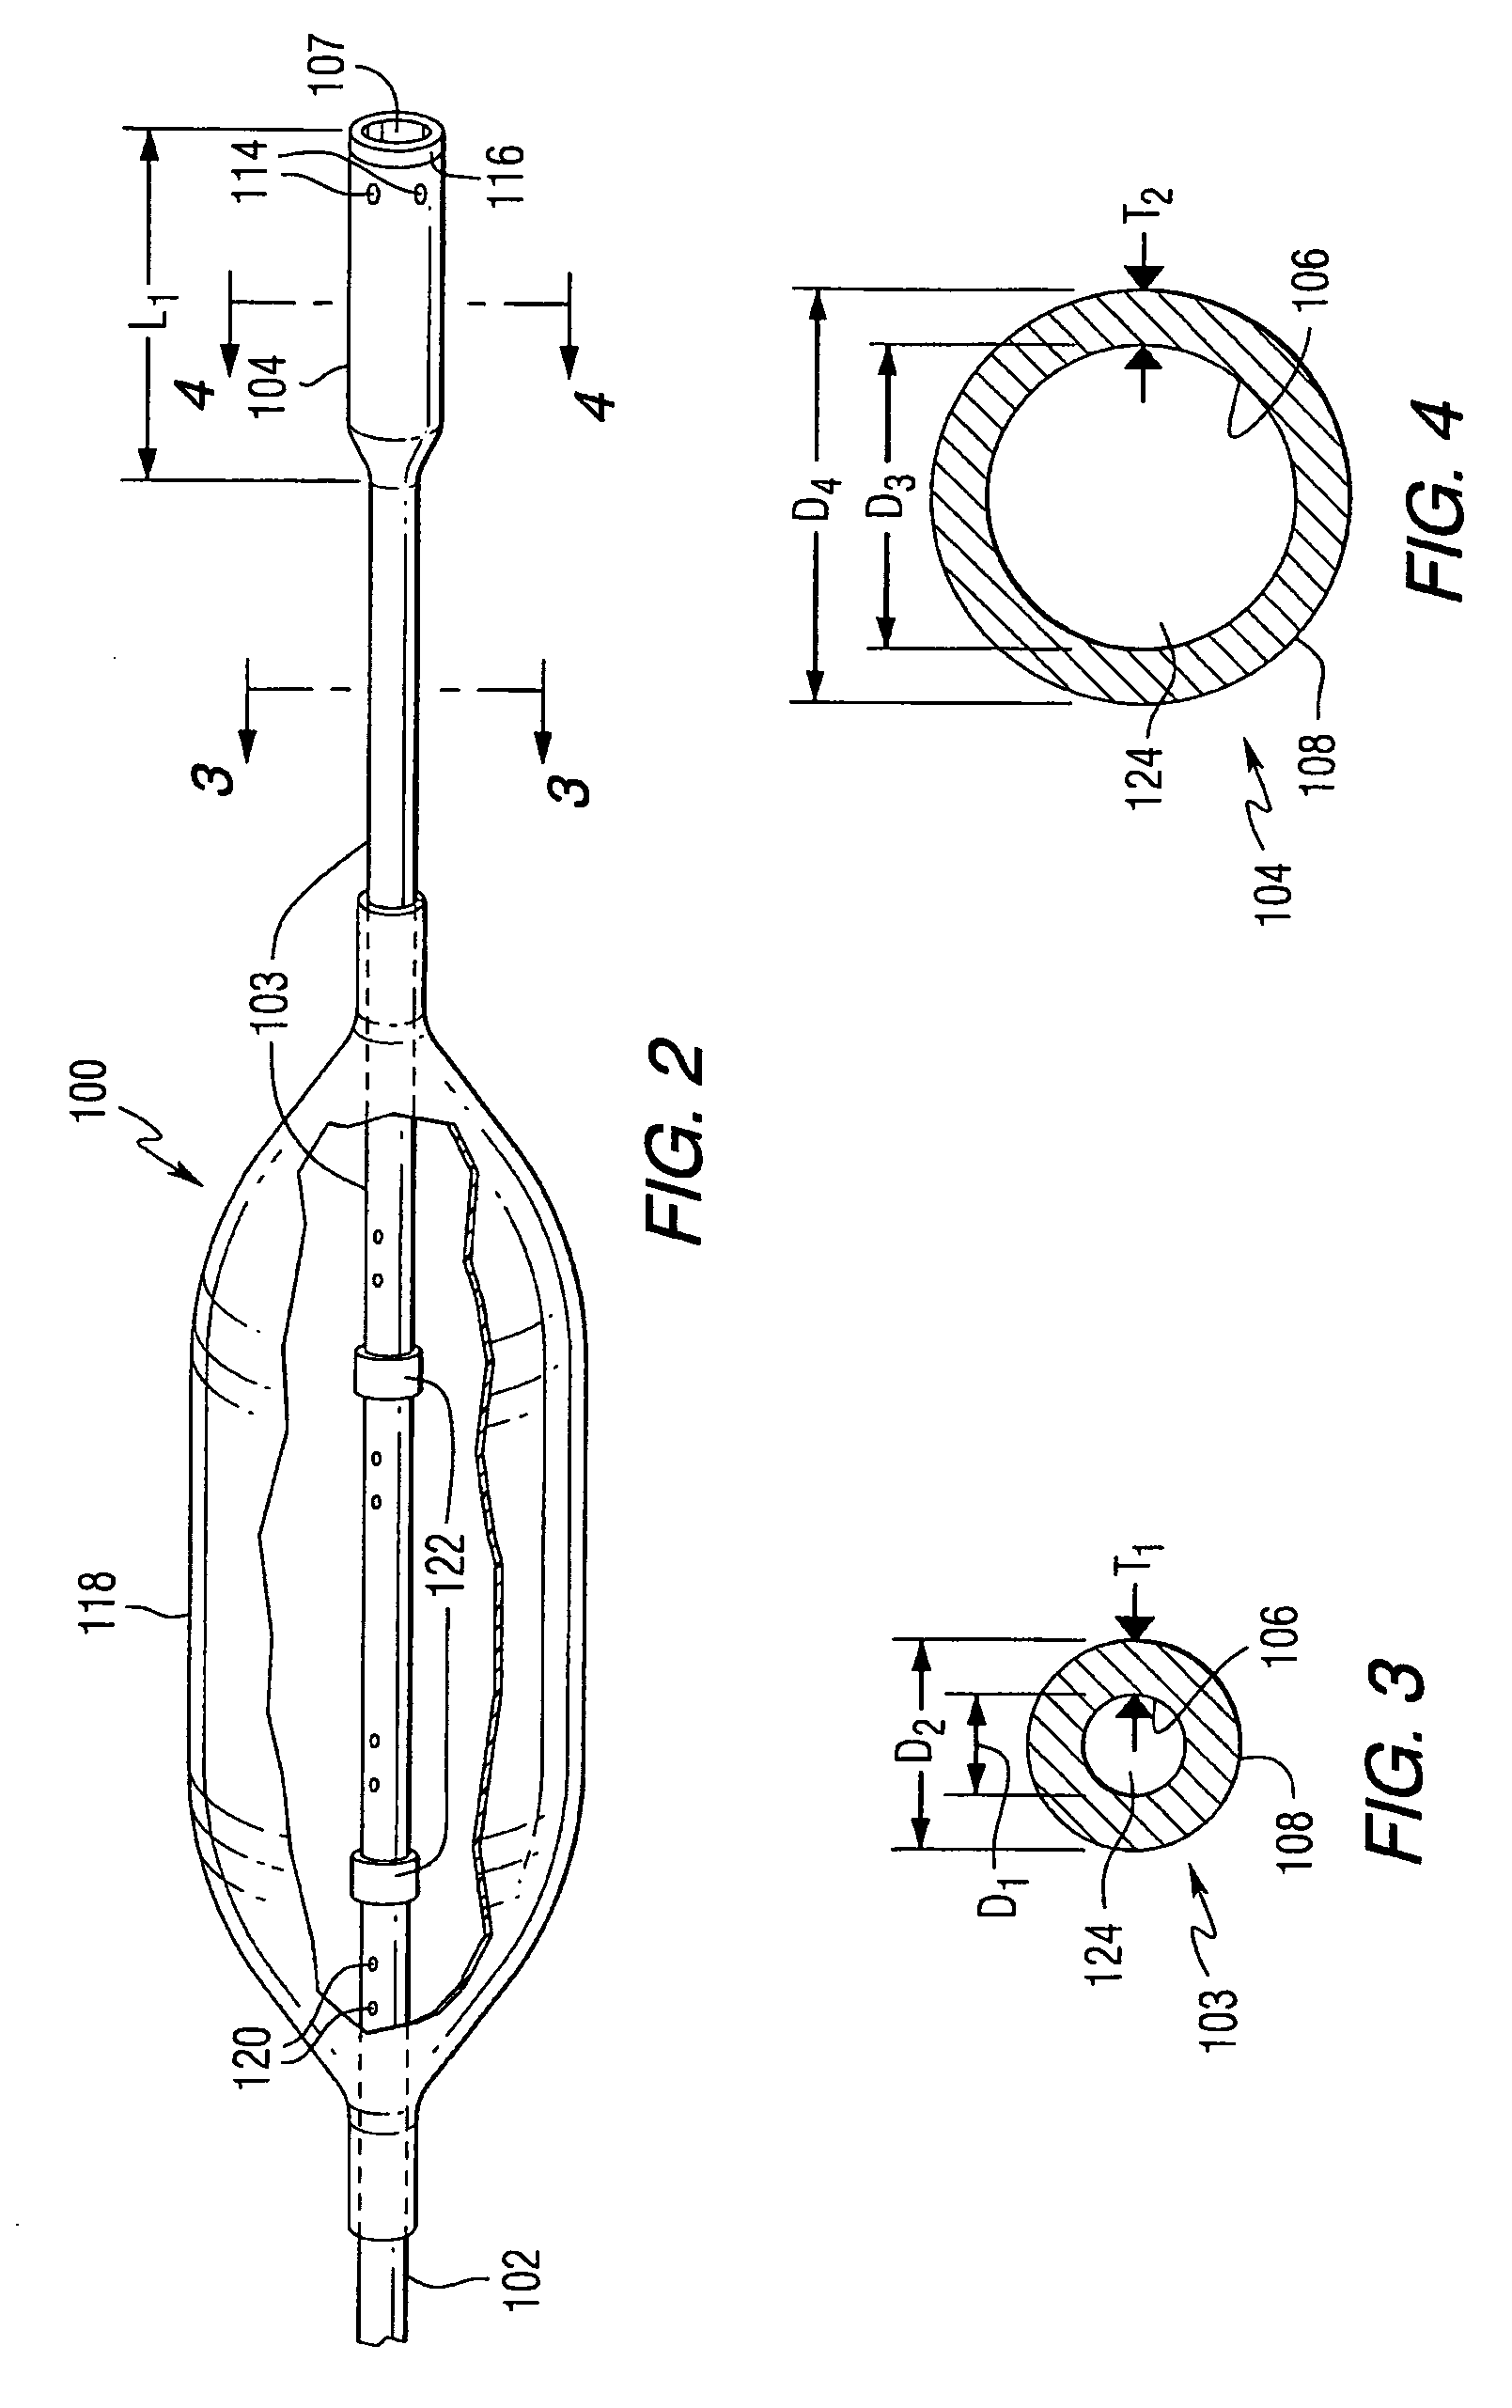 Vascular catheter with expanded distal tip for receiving a thromboembolic protection device and method of use